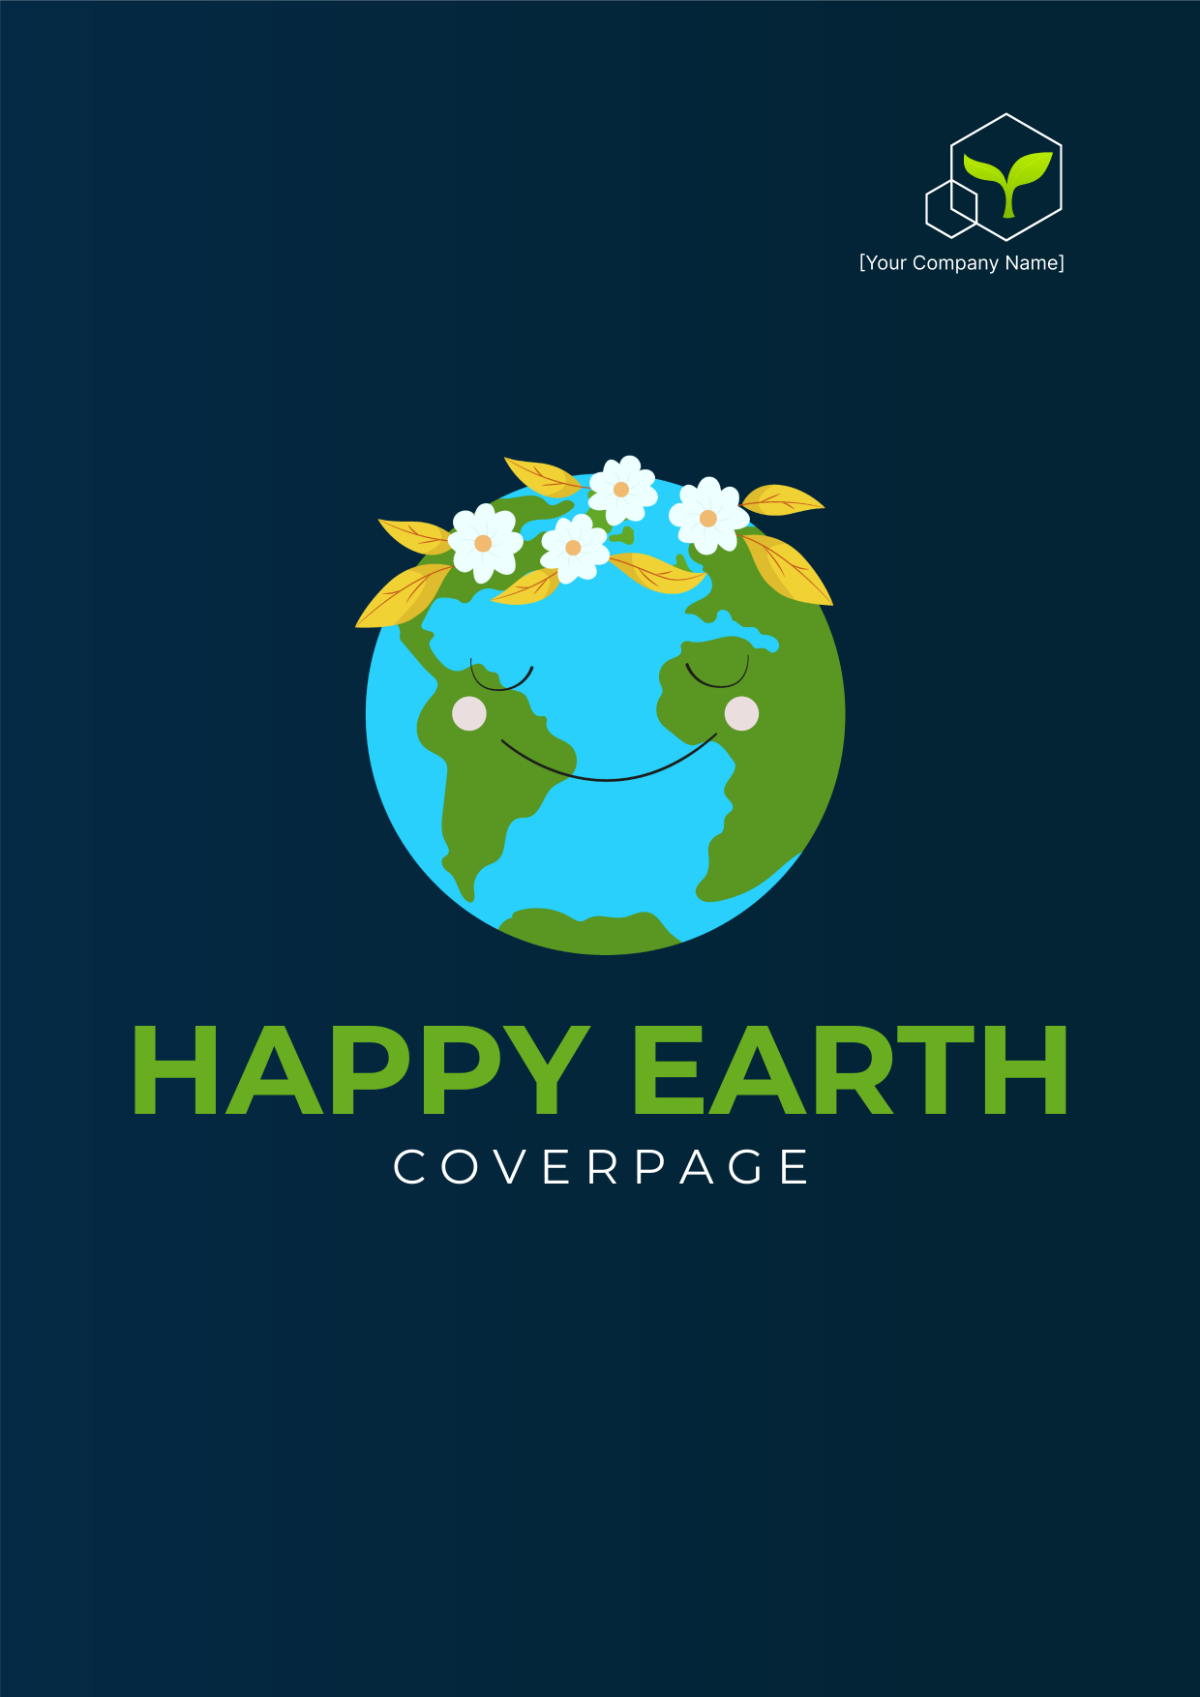 Happy Earth Day Cover Page Template